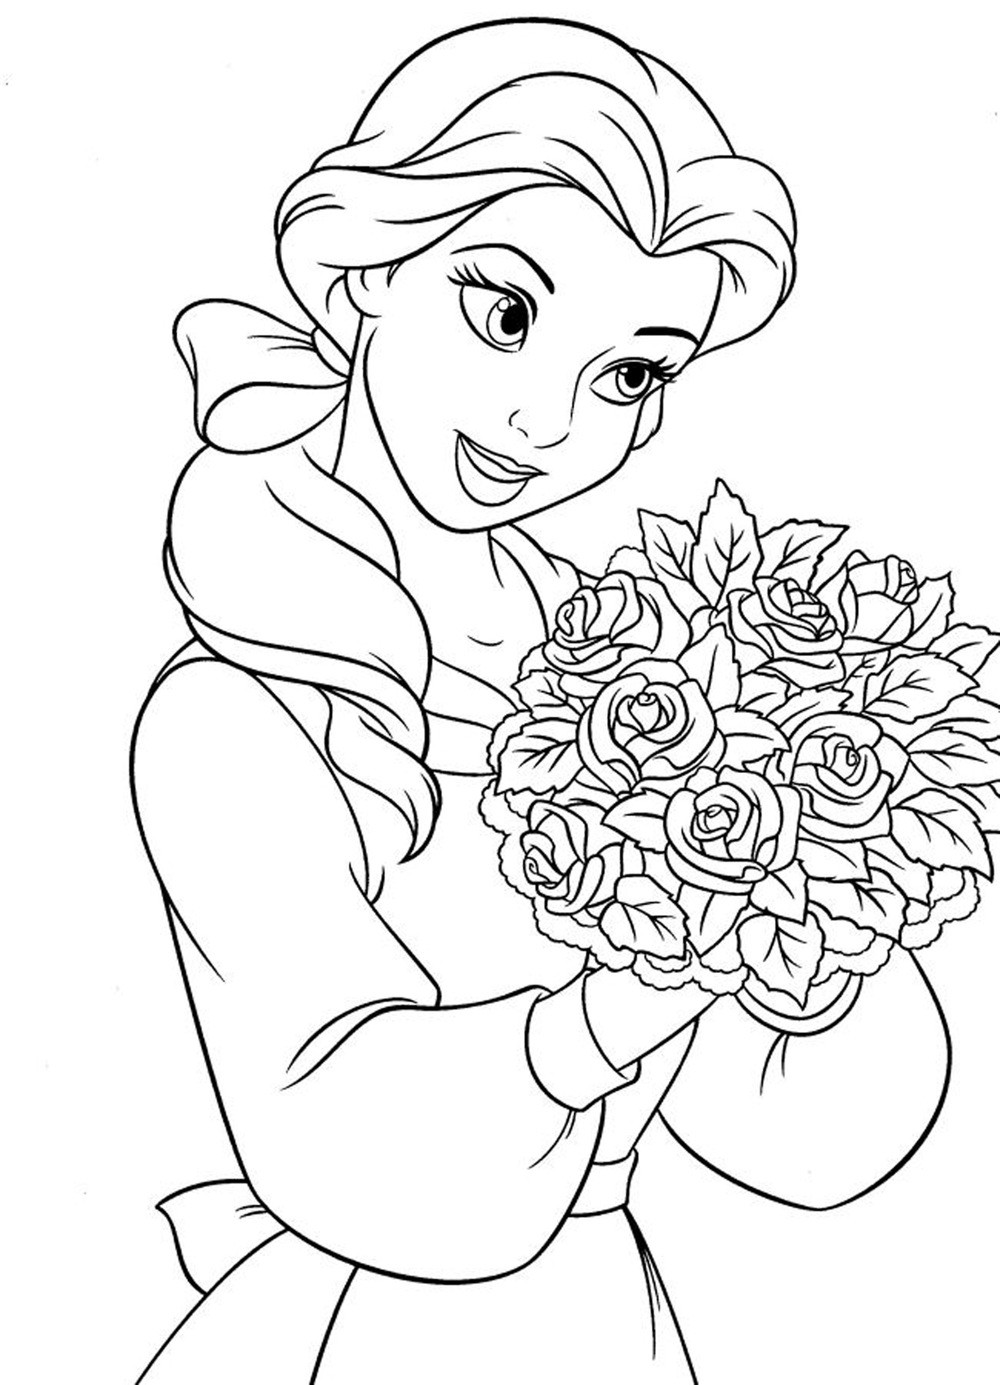 Free Disney Coloring Pages For Kids
 Disney Princess Tiana Coloring Page Disney